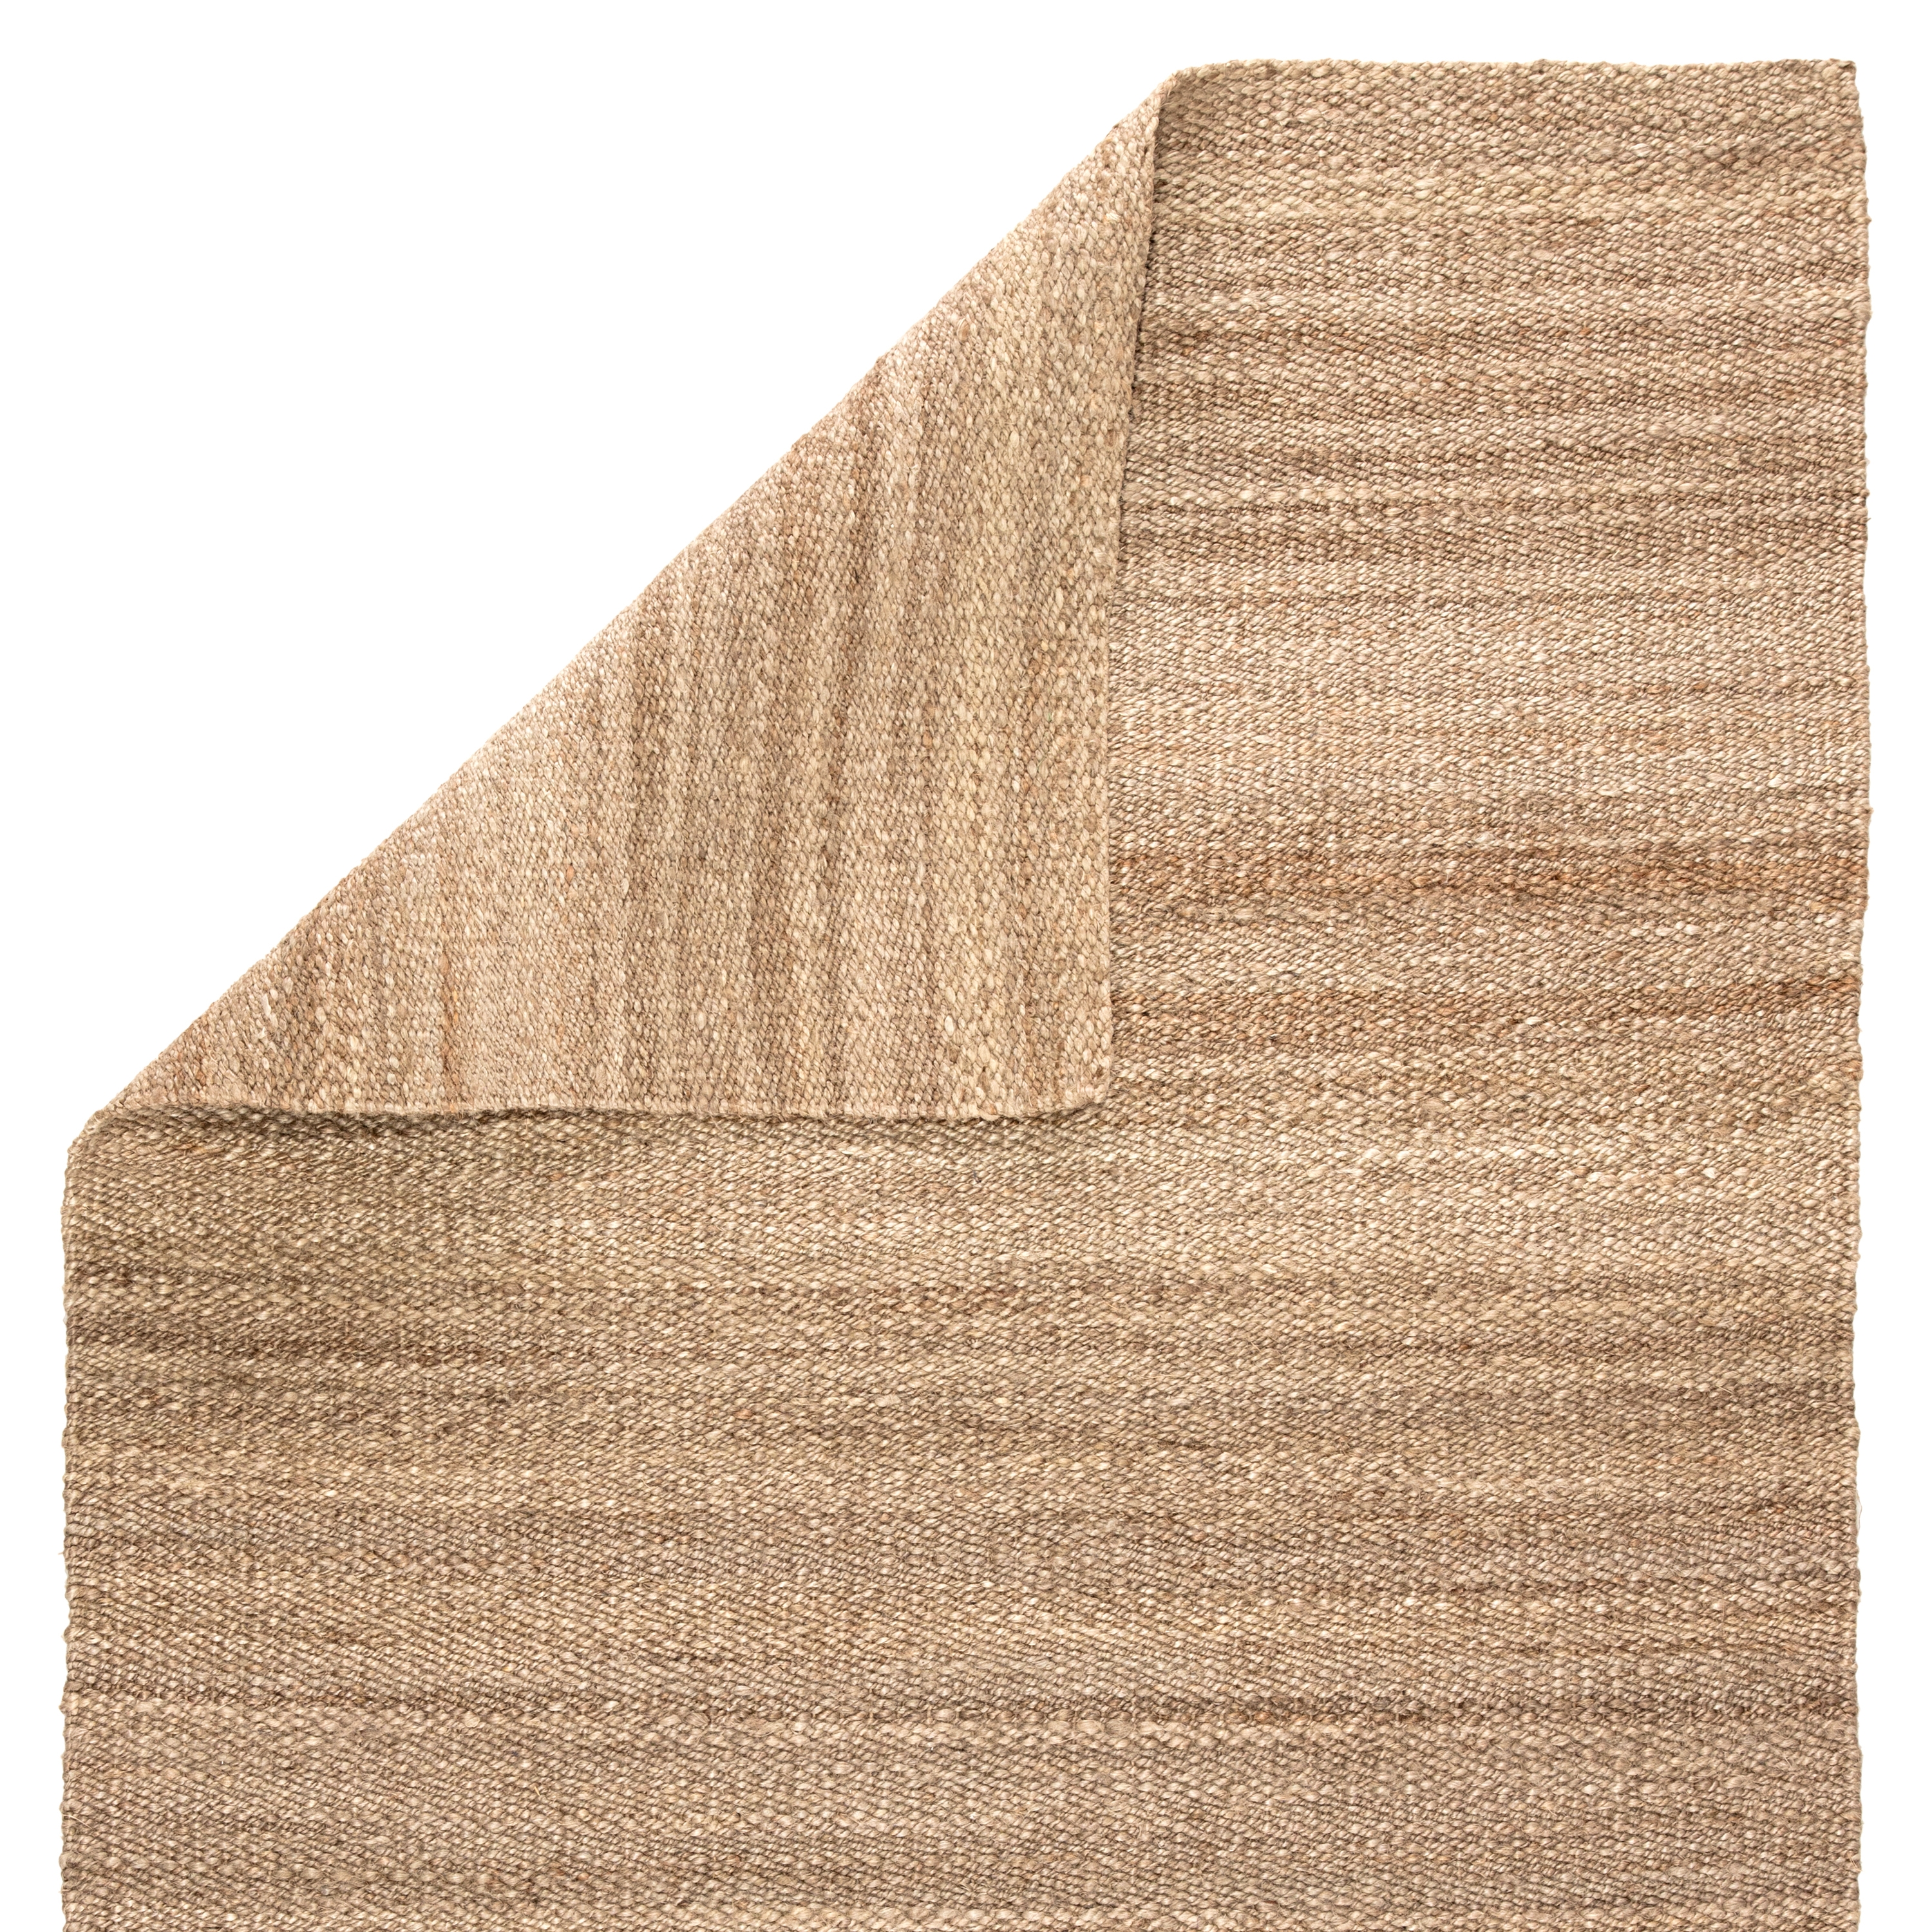 Hilo Natural Solid Tan Area Rug (5'X8') - Image 2